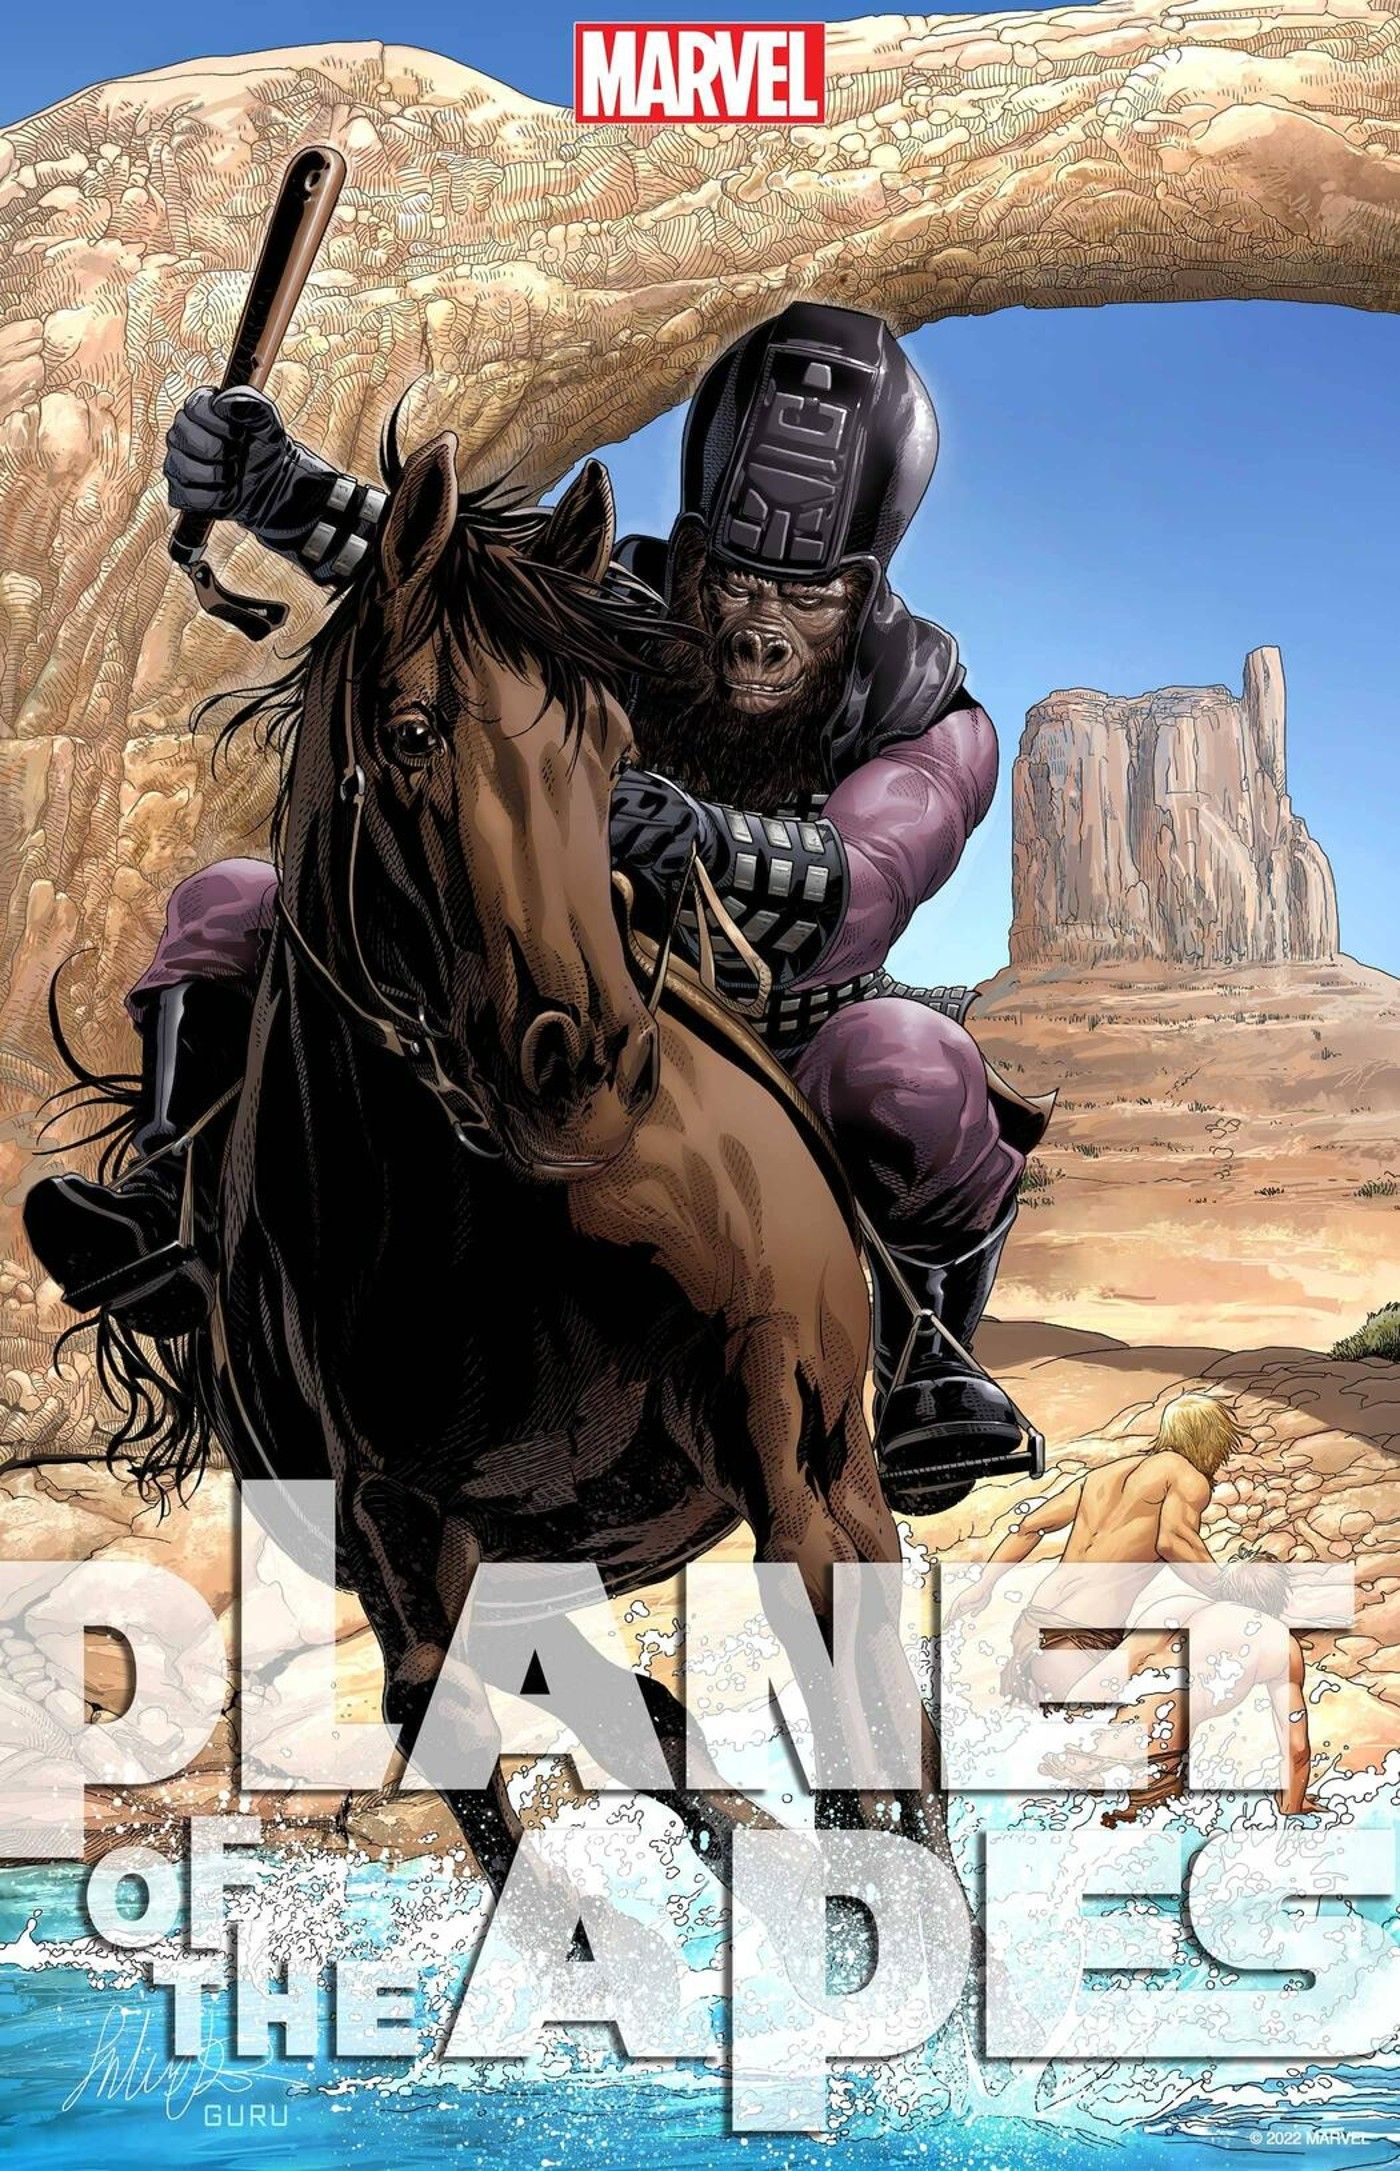 Planet of the Apes 1 Marvel Comics